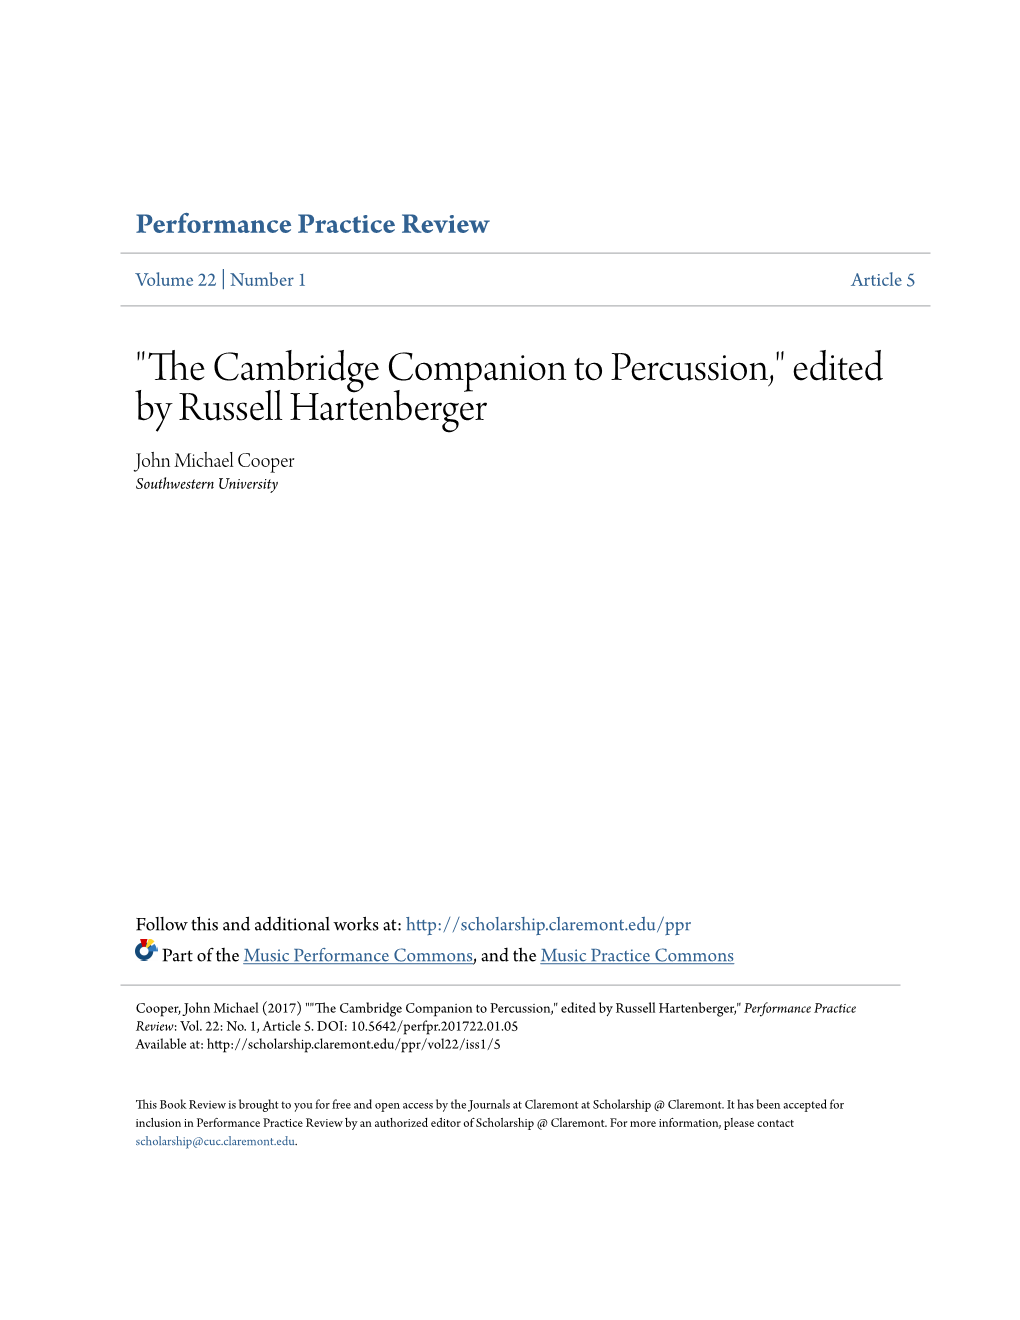 "The Cambridge Companion to Percussion," Edited by Russell Hartenberger